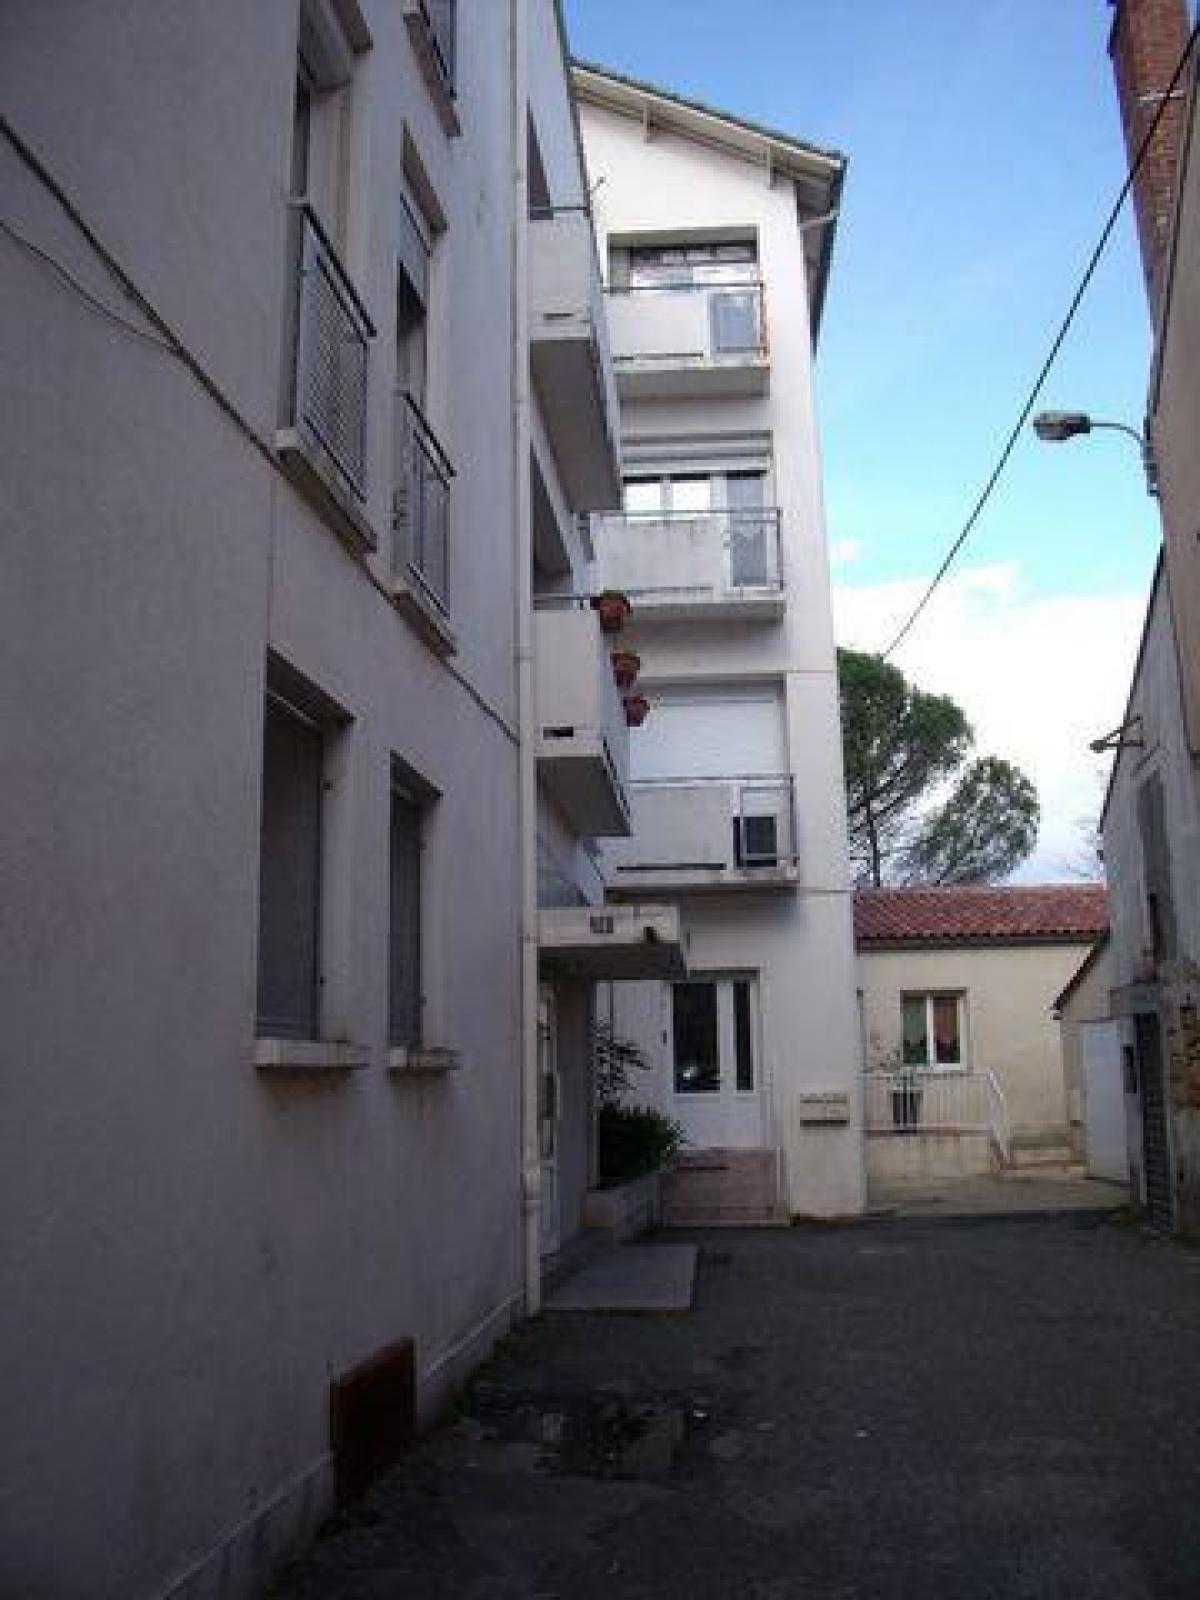 Picture of Condo For Sale in Monsempron Libos, Lot Et Garonne, France